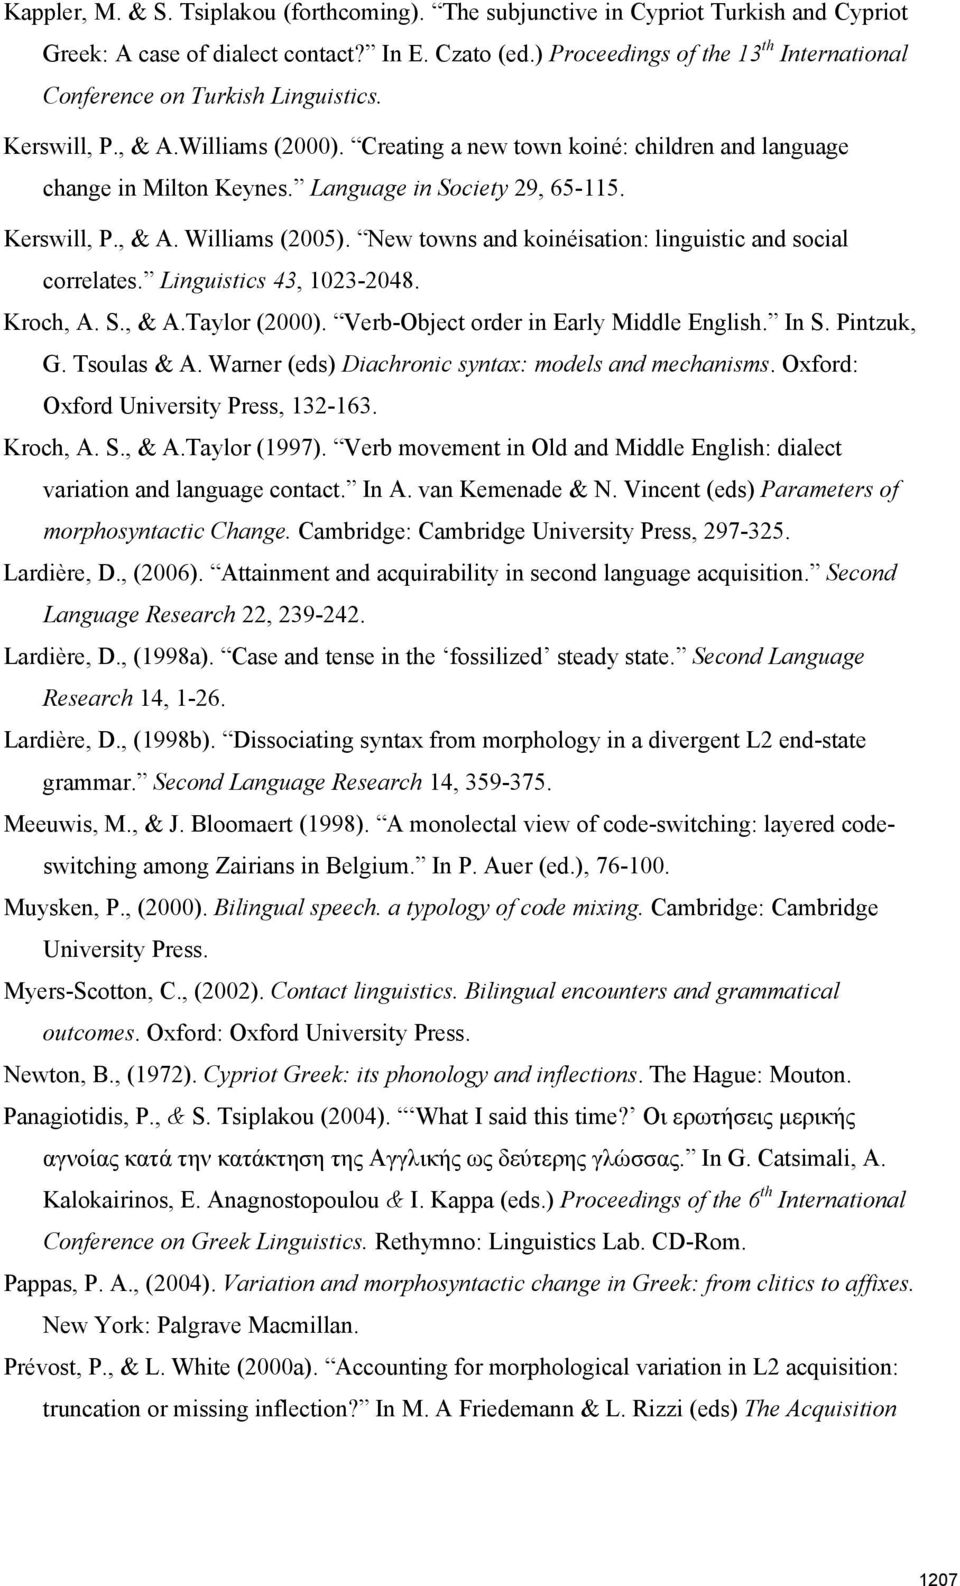 Language in Society 29, 65-115. Kerswill, P., & A. Williams (2005). New towns and koinéisation: linguistic and social correlates. Linguistics 43, 1023-2048. Kroch, A. S., & A.Taylor (2000).